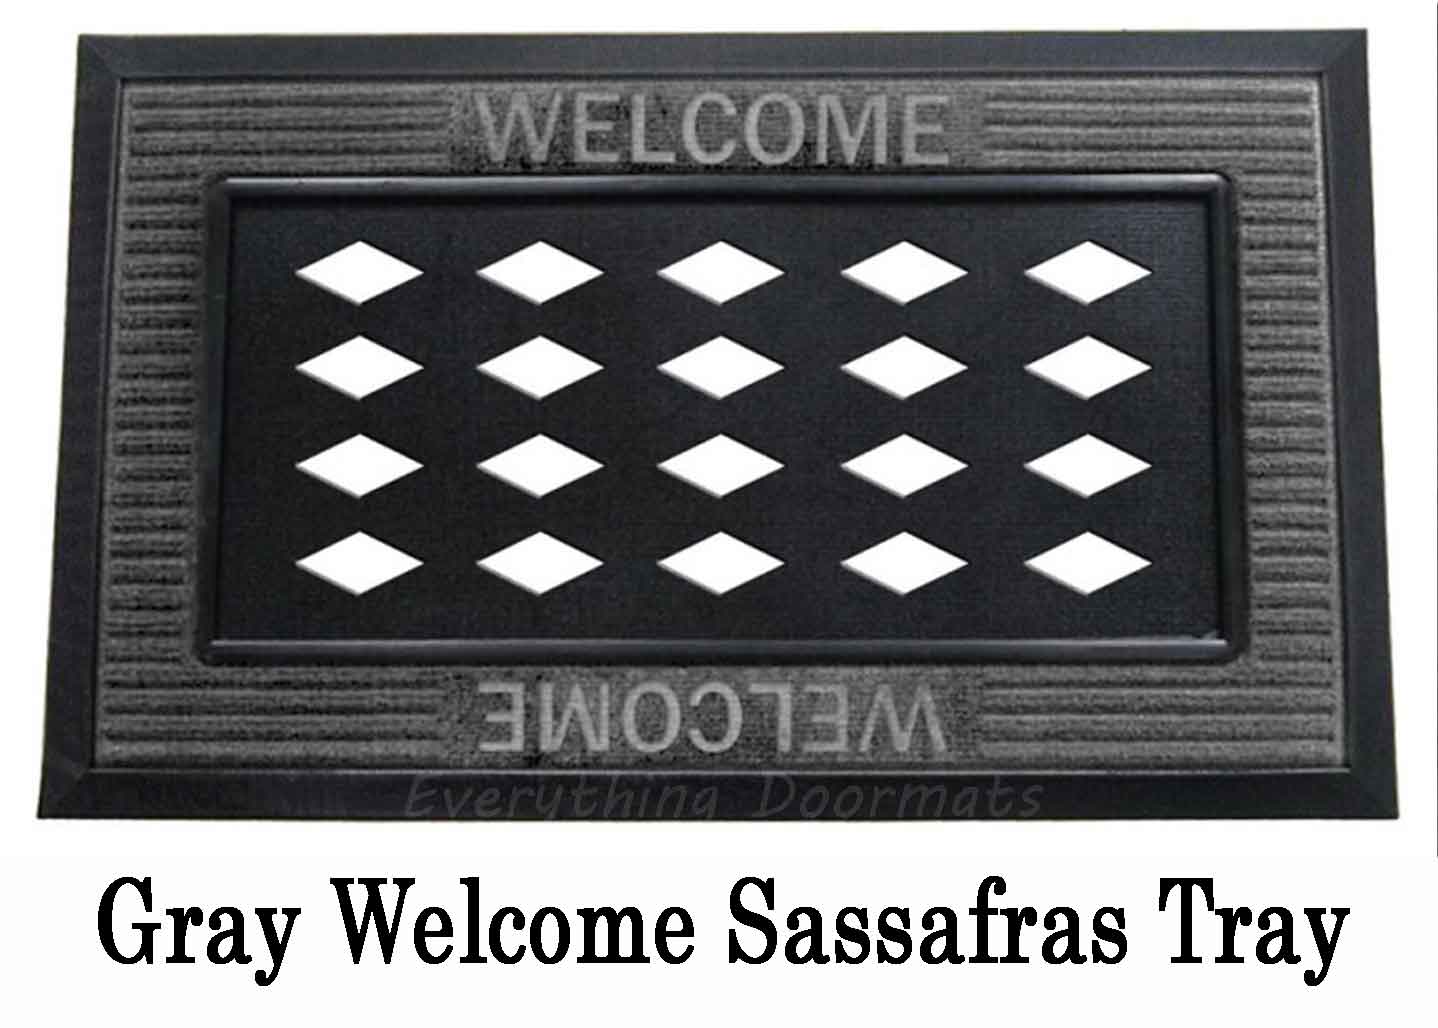 30 x 18 inches Door Mat Inserts Sold Separately Evergreen Switch Mat Frame 